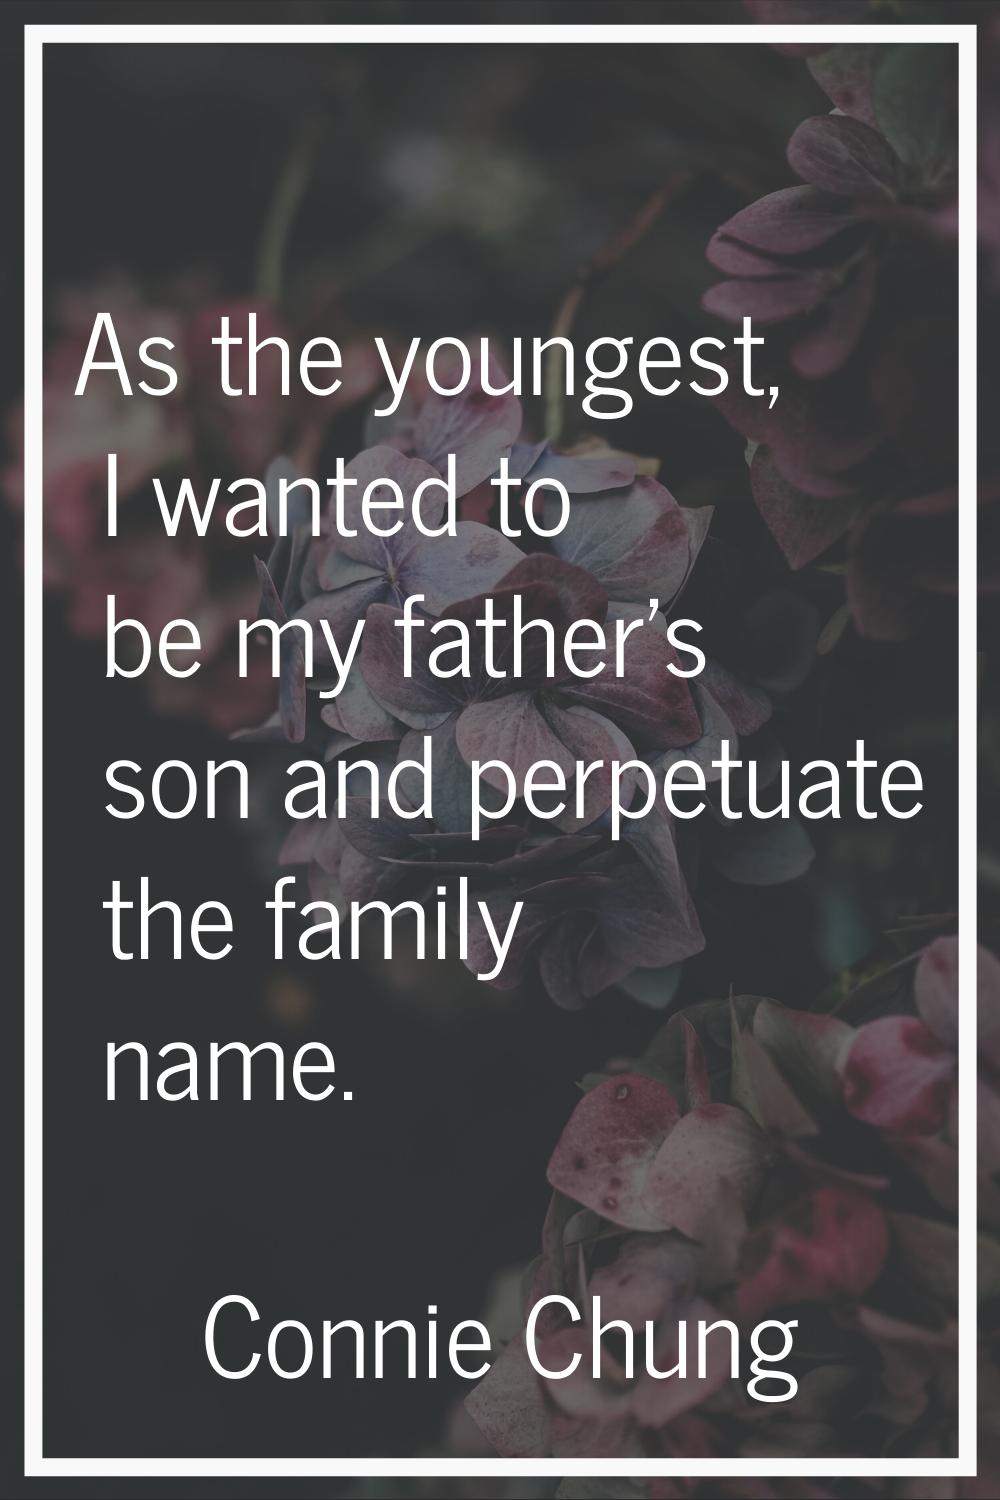 As the youngest, I wanted to be my father's son and perpetuate the family name.